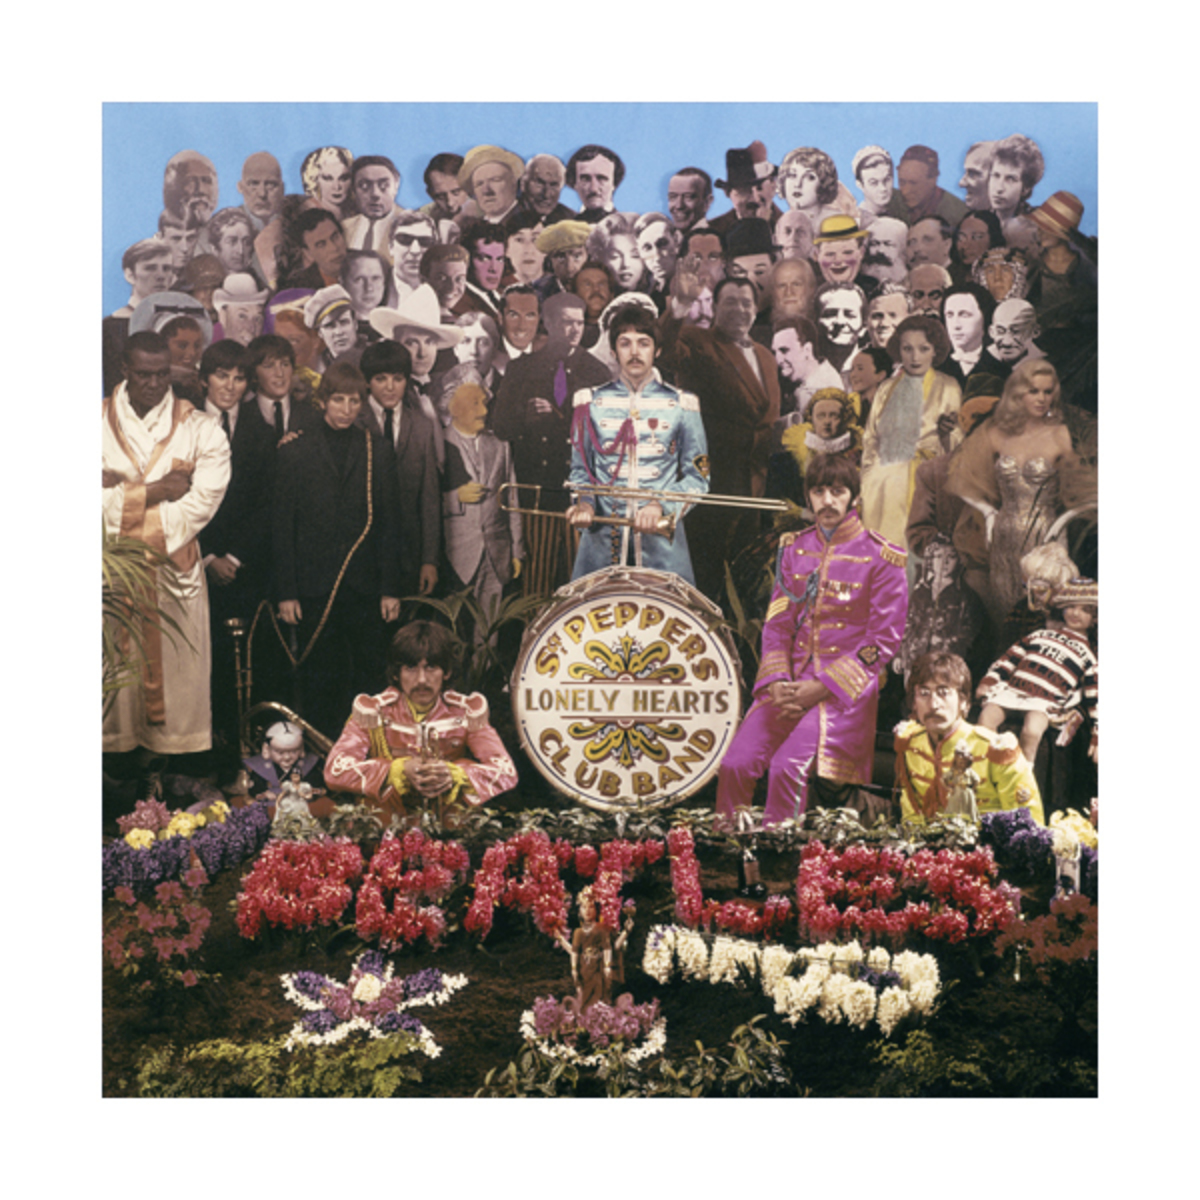 The Beatles – Sgt. Pepper’s Lonley Heart Club Band Outtake by Miachael Cooper